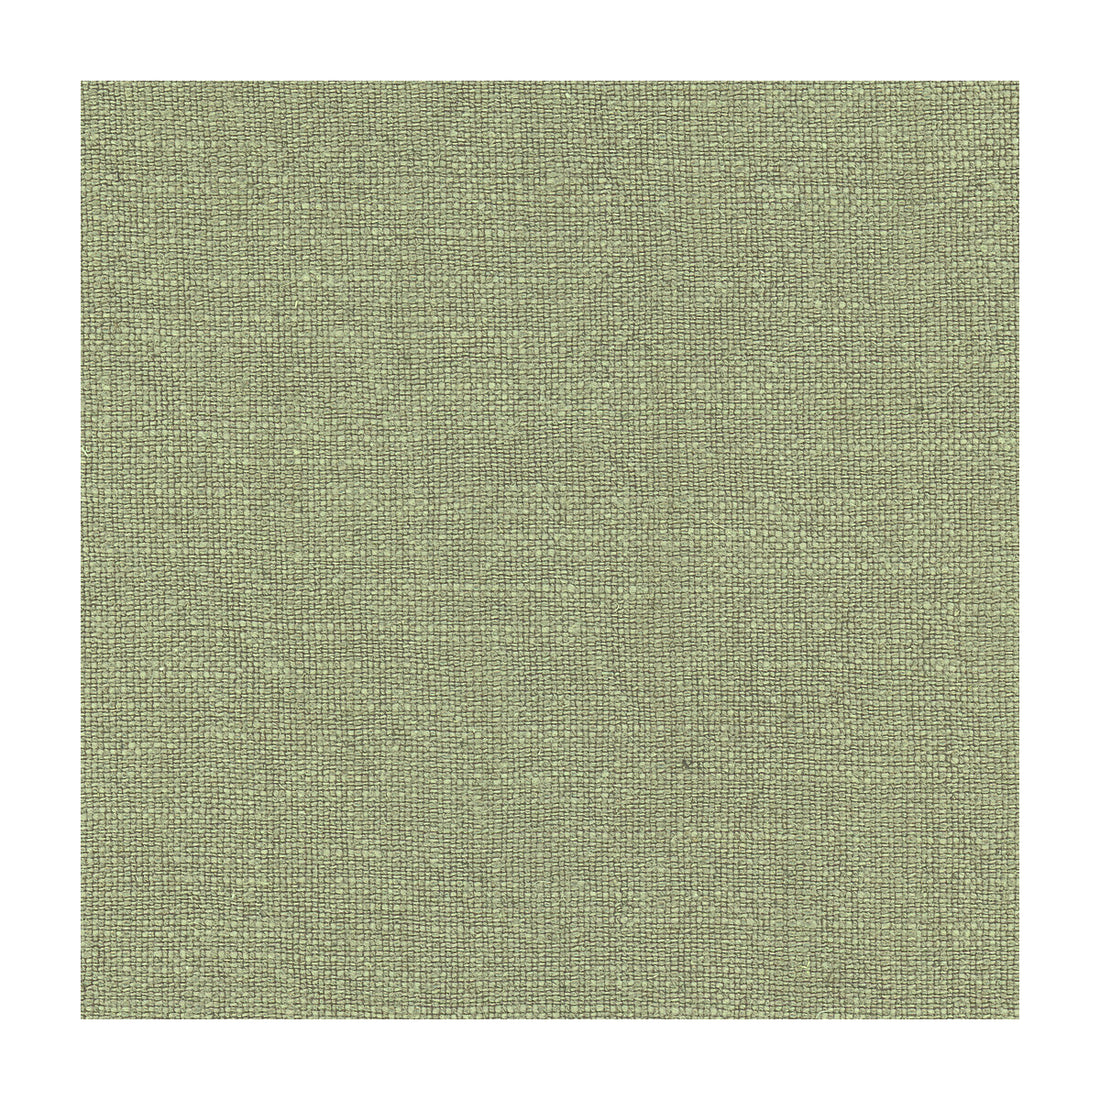 Maidenhead fabric in haze color - pattern 2015150.11.0 - by Lee Jofa in the Colour Library VII collection